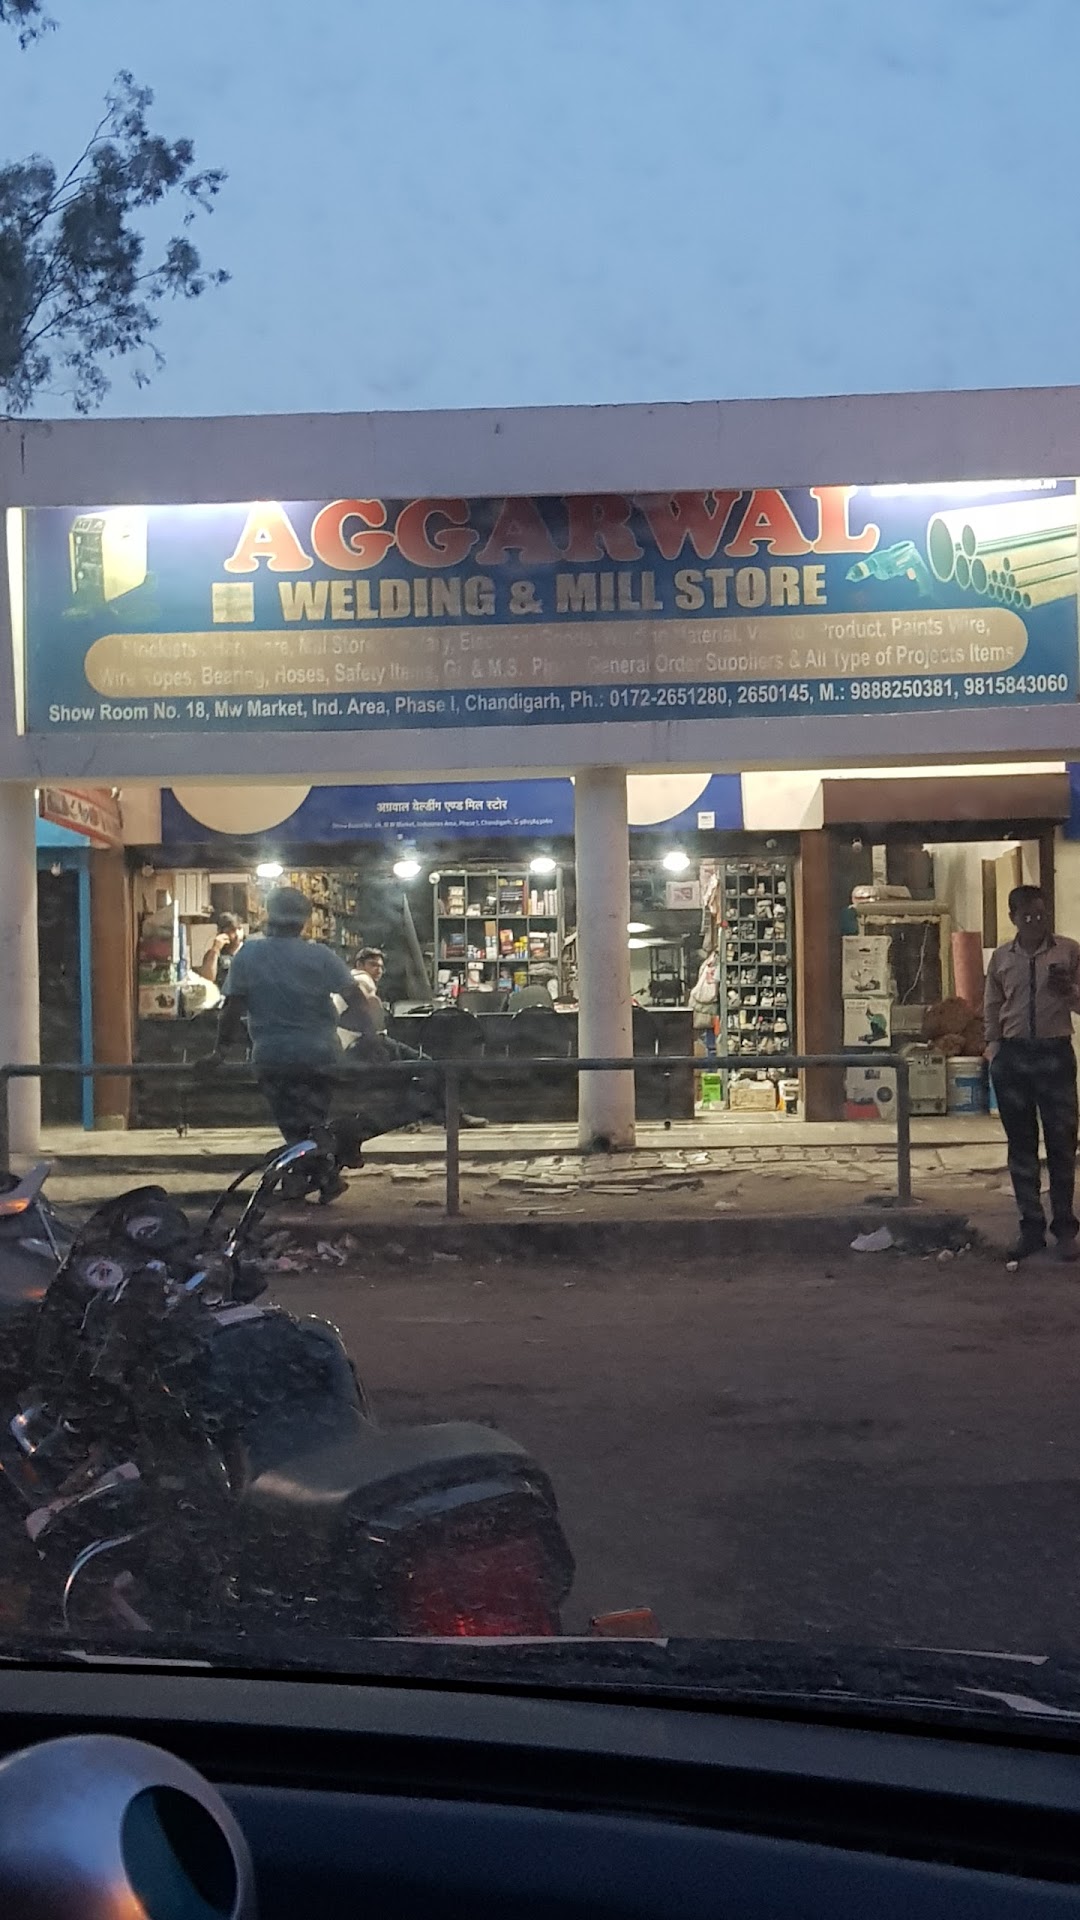 Aggarwal Welding & Mill Store